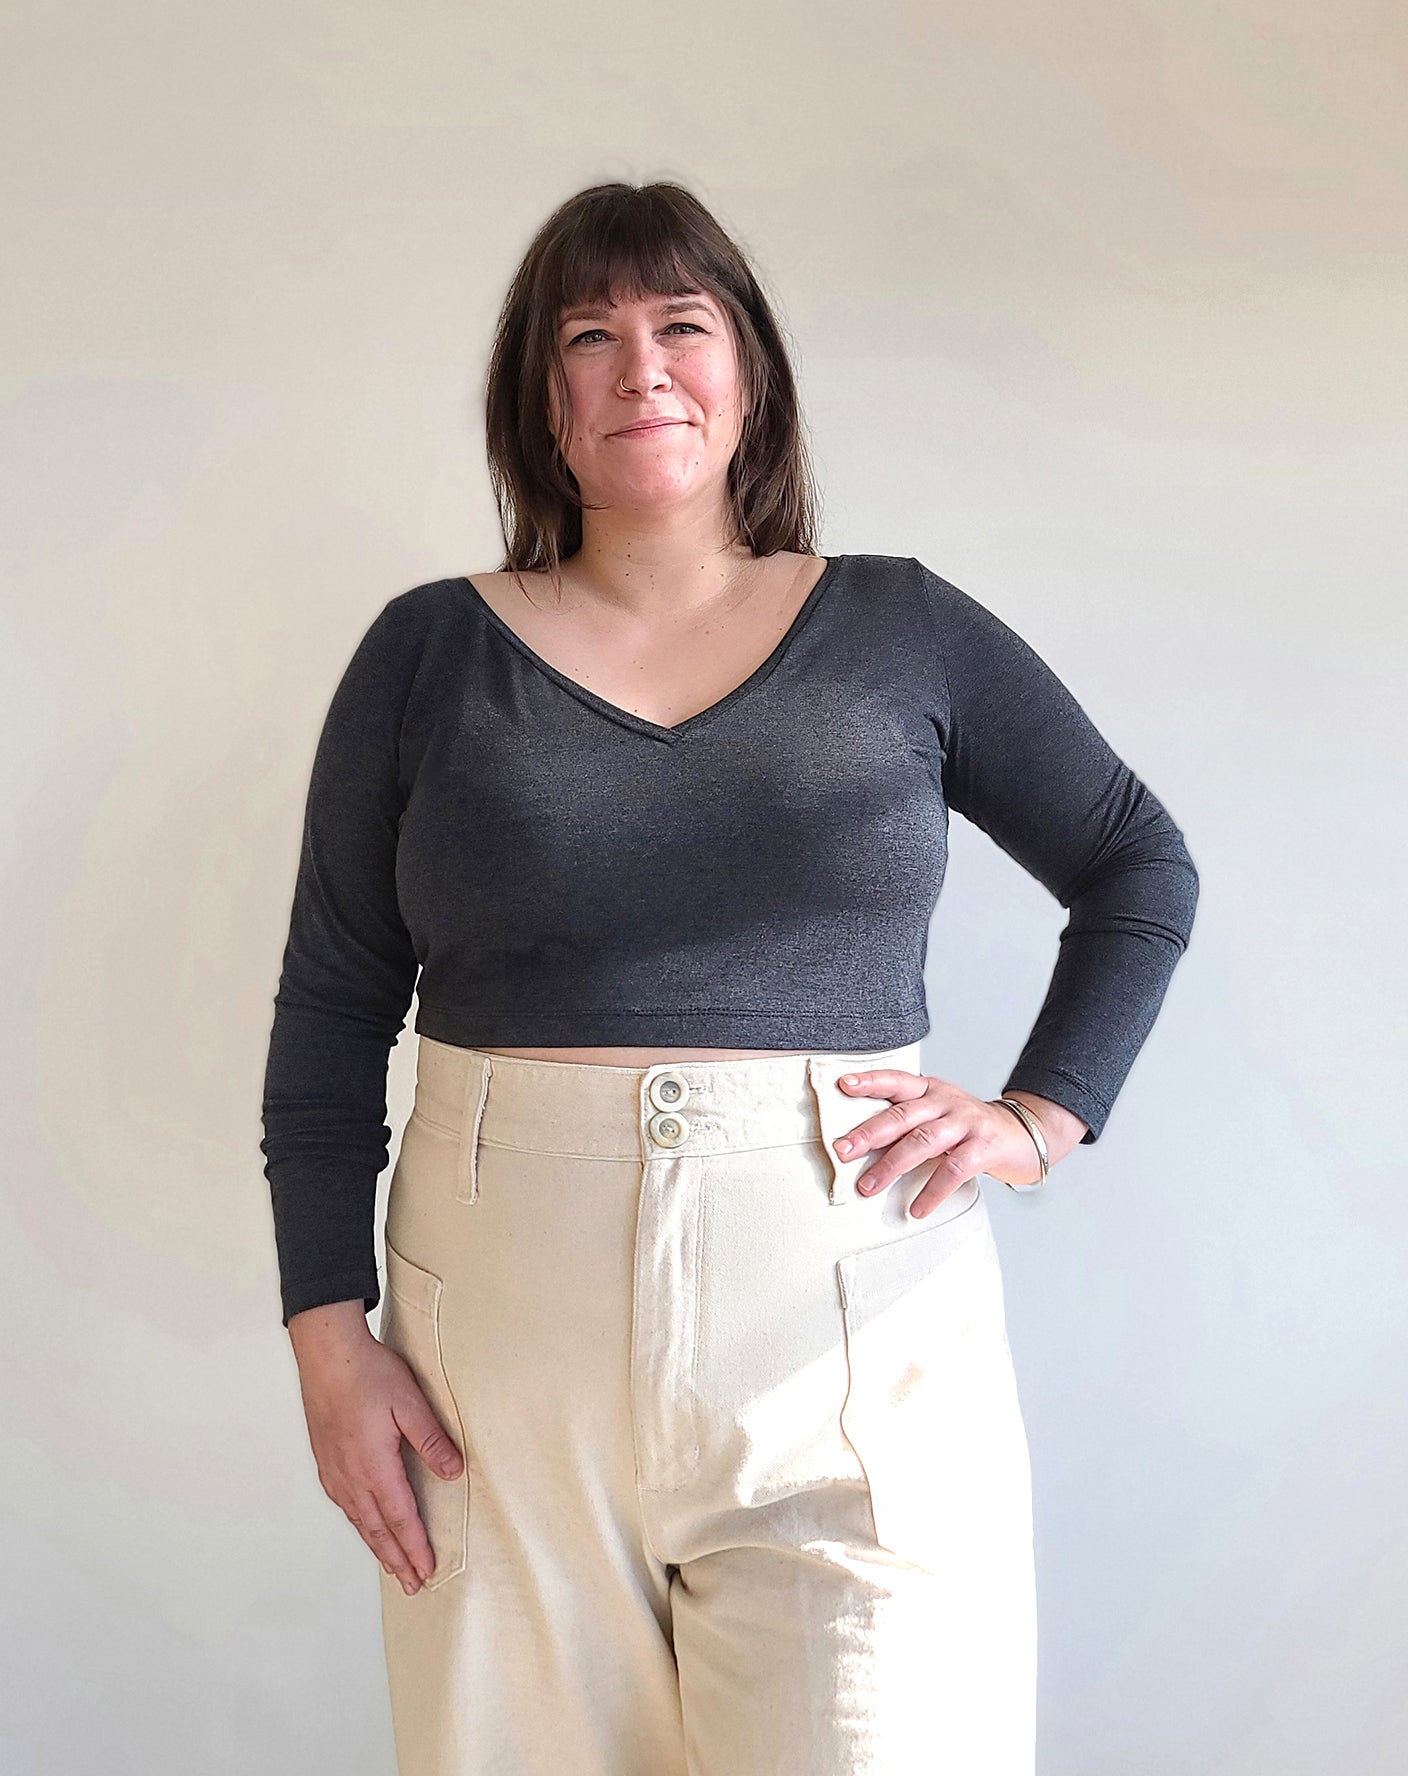 Introducing the Willow Wrap Belt PDF Pattern! – Sew House Seven